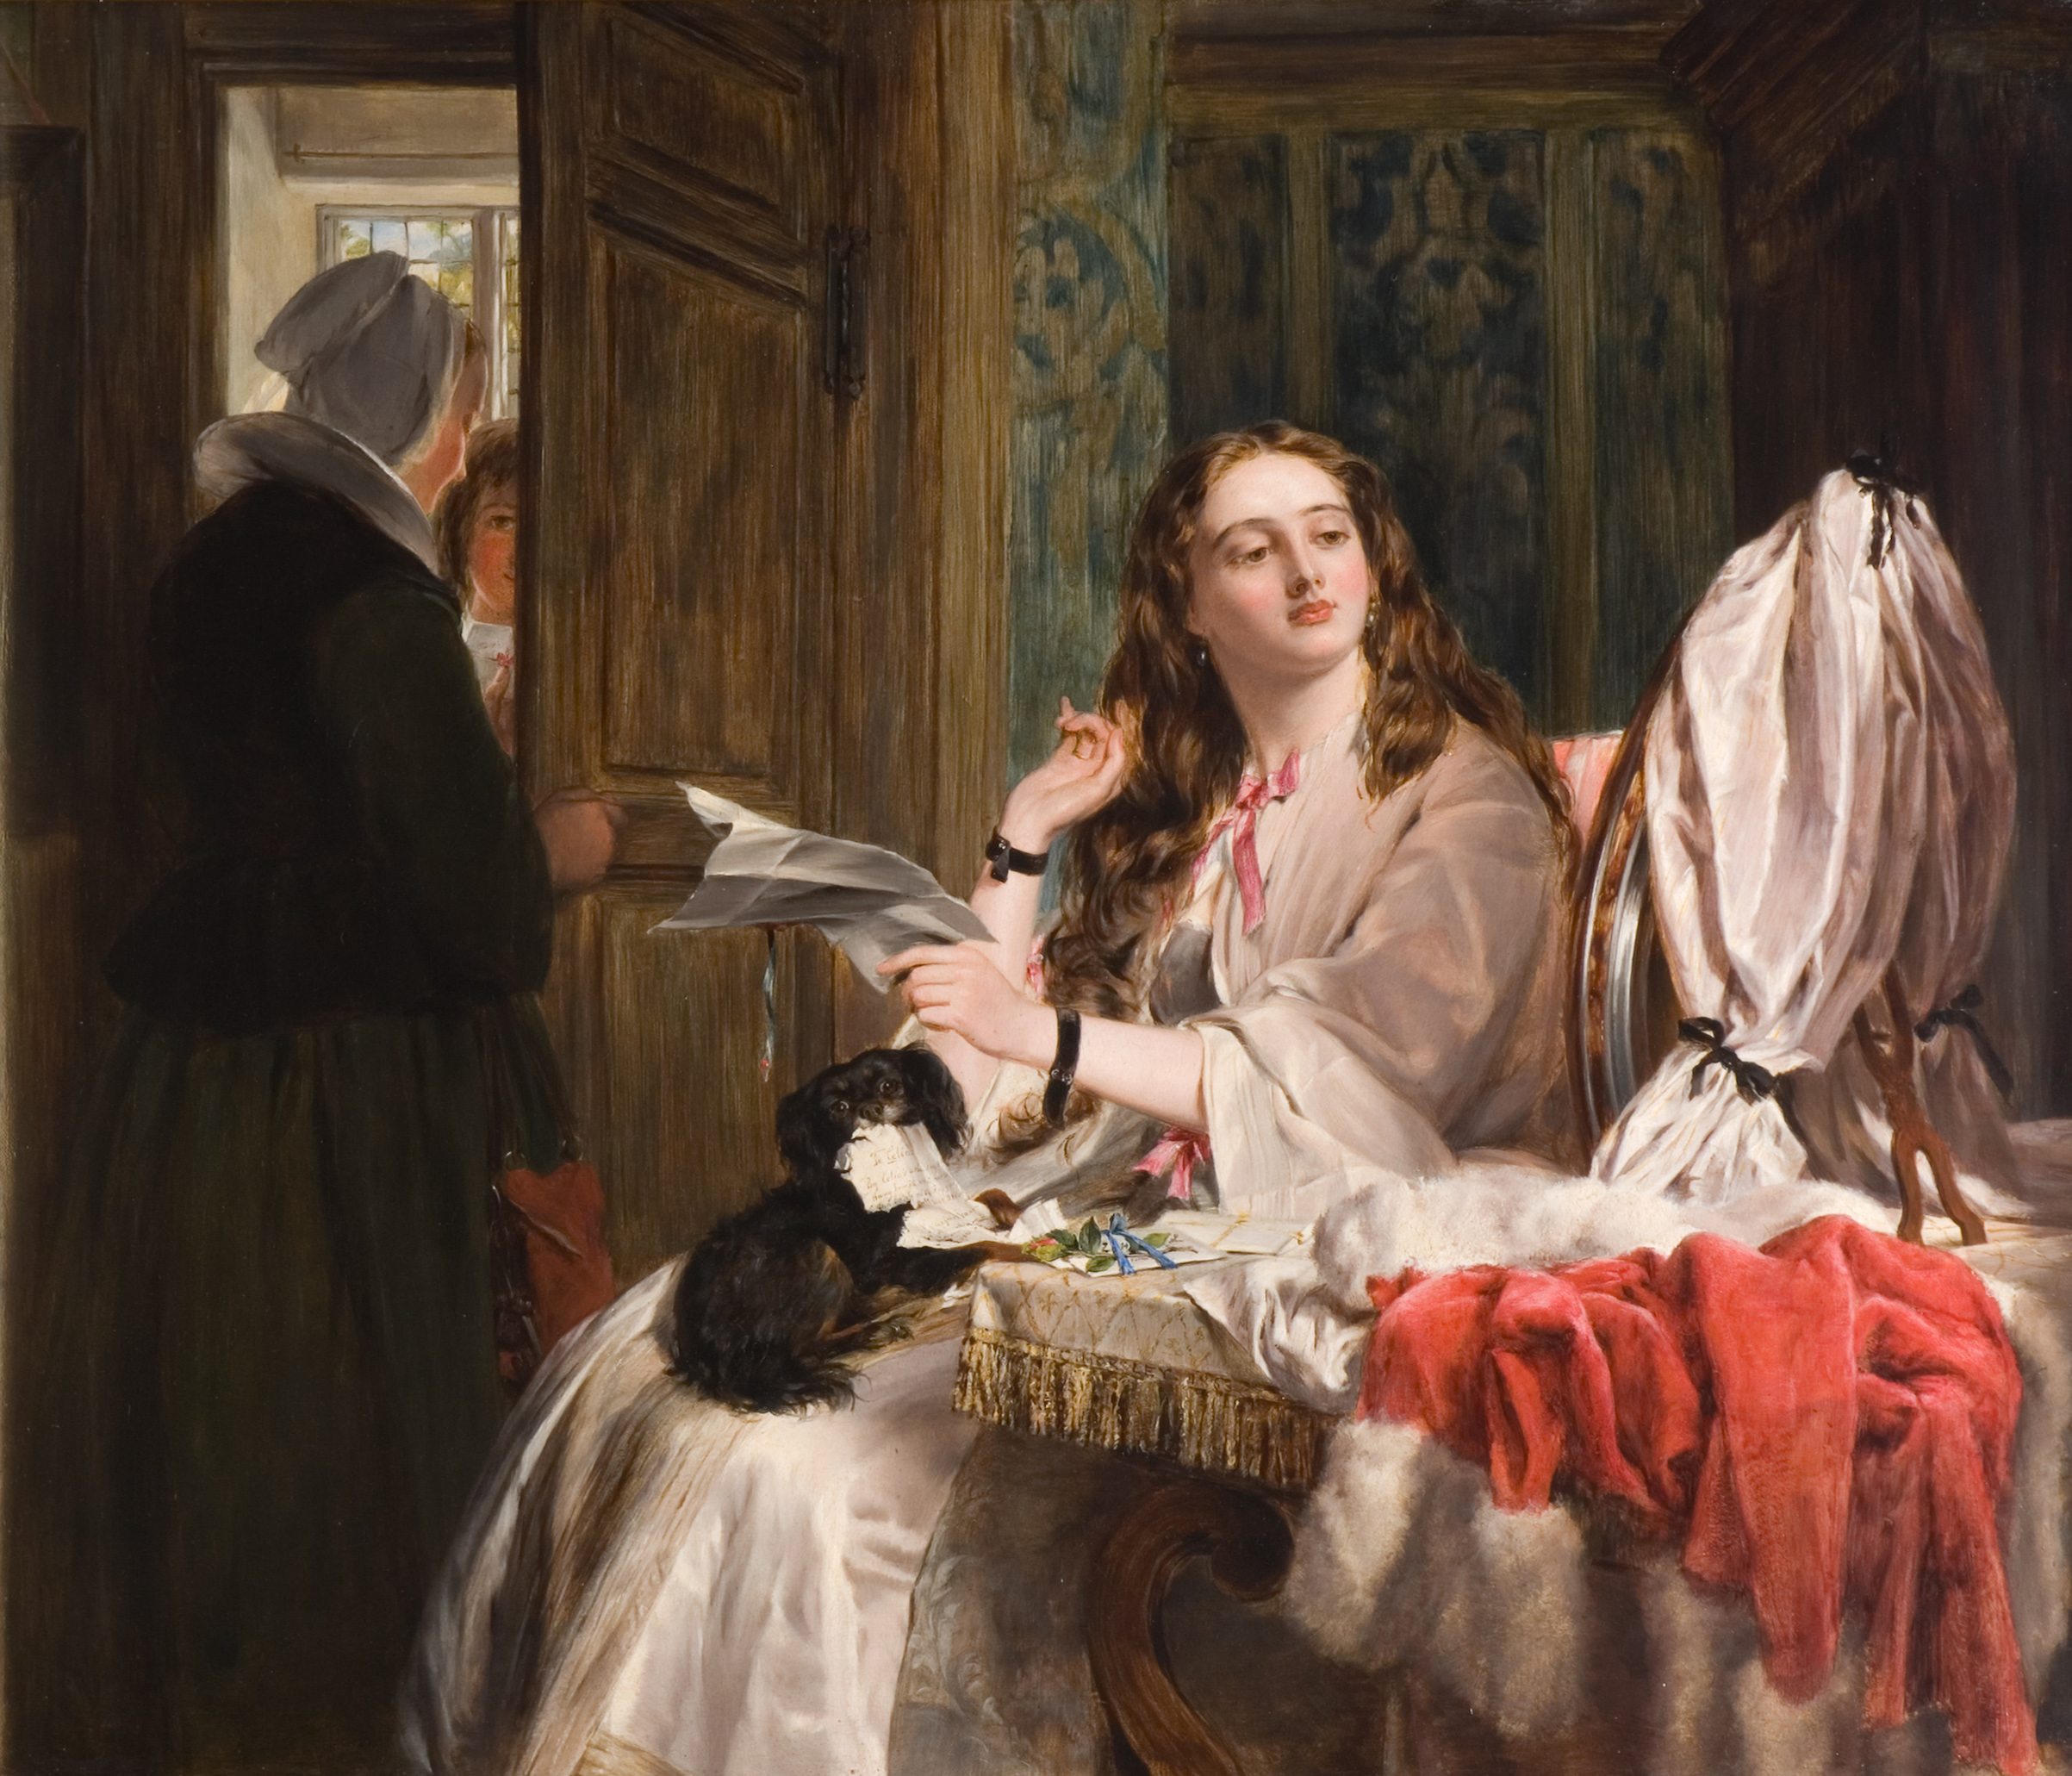 St. Valentine's Morning, 1863. Oil Painting by John Calcott Horsley (1817-1903). Oil painting showing a young woman in her room reading a letter with a black dog on her lap. At the door, which is being opened a lady in black, a male suitor waits to enter. (Todd-White Art Photography/Getty Images)